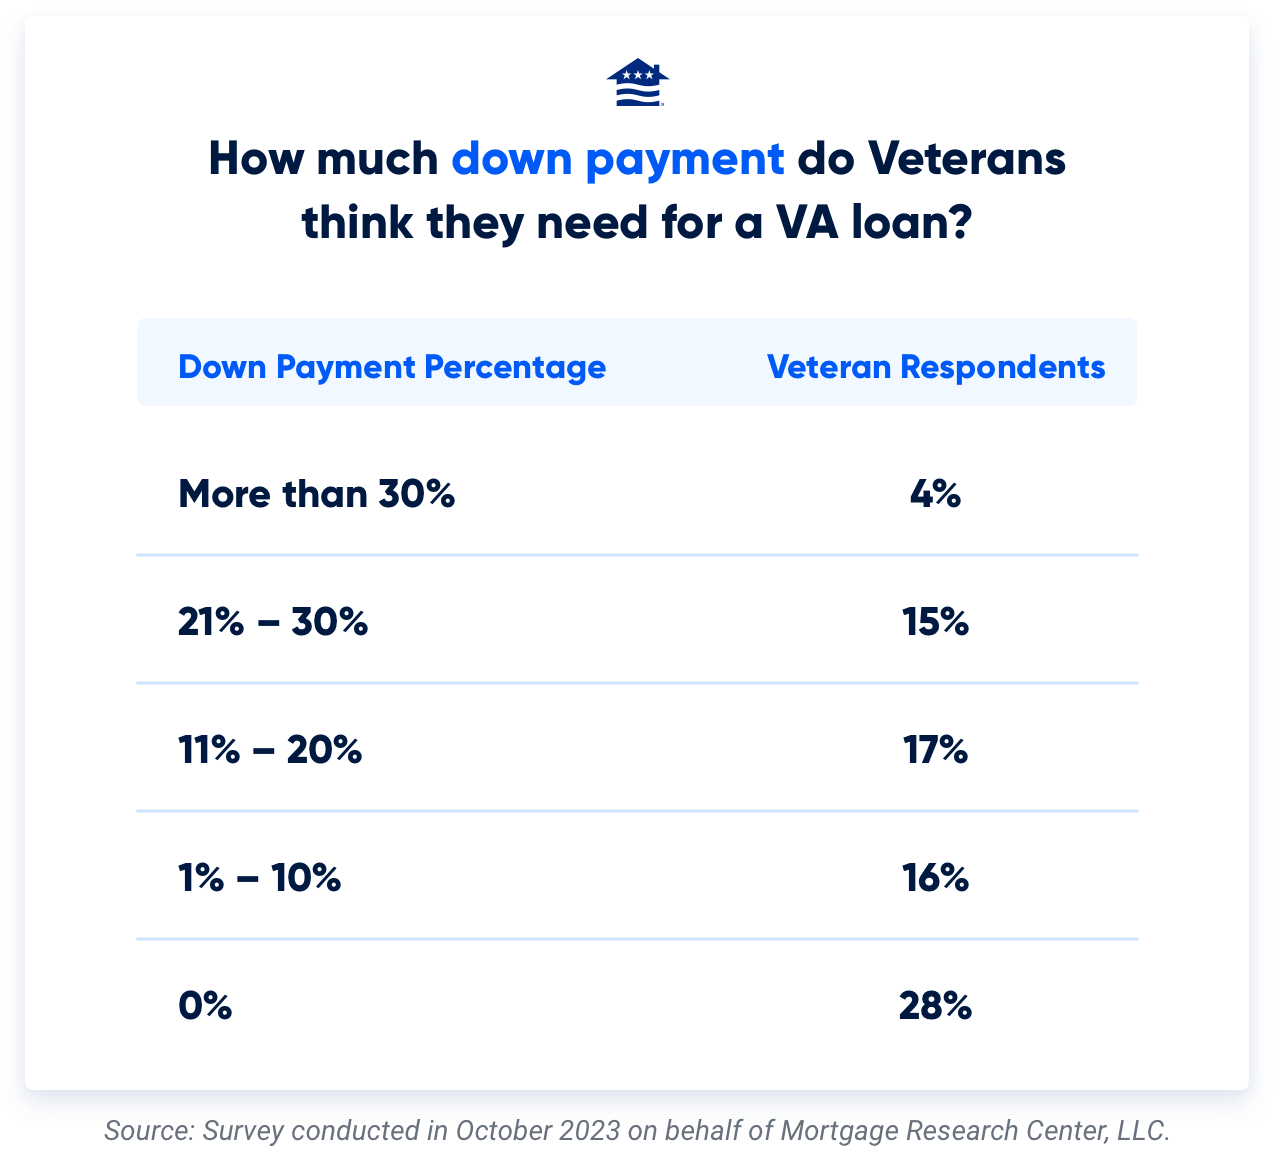 A recent survey found that only 3-in-10 Veterans know they can buy a home with zero down payment. 